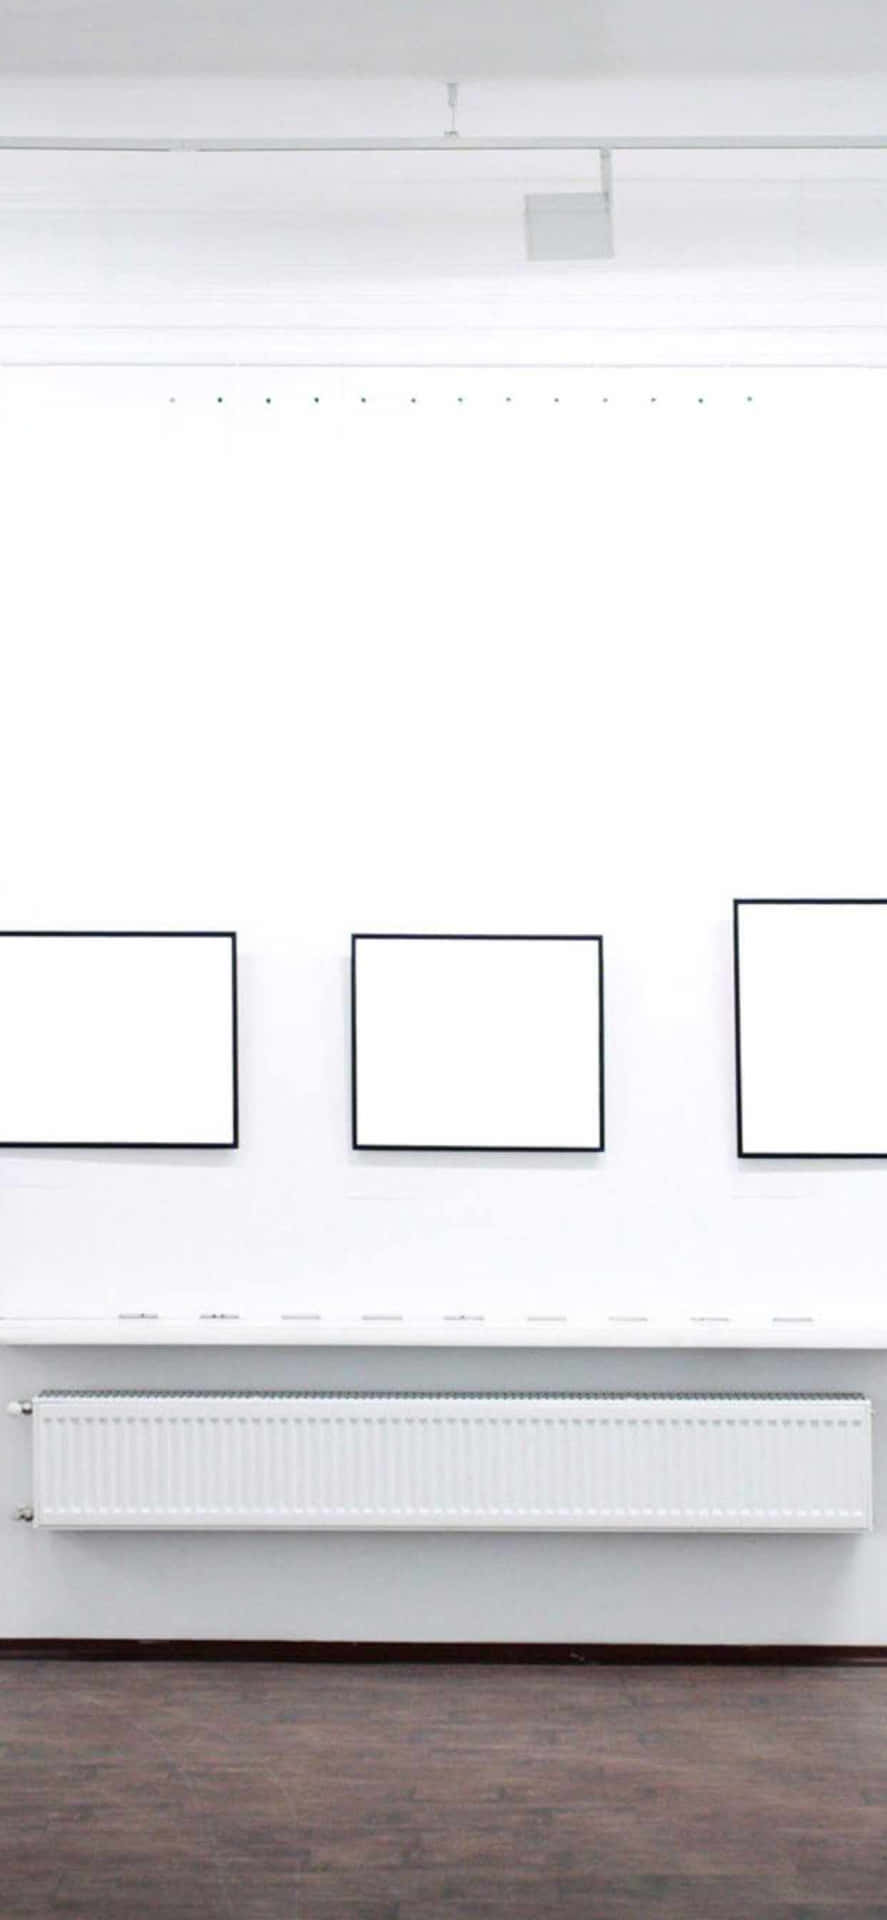 A White Room With Several Blank Framed Pictures